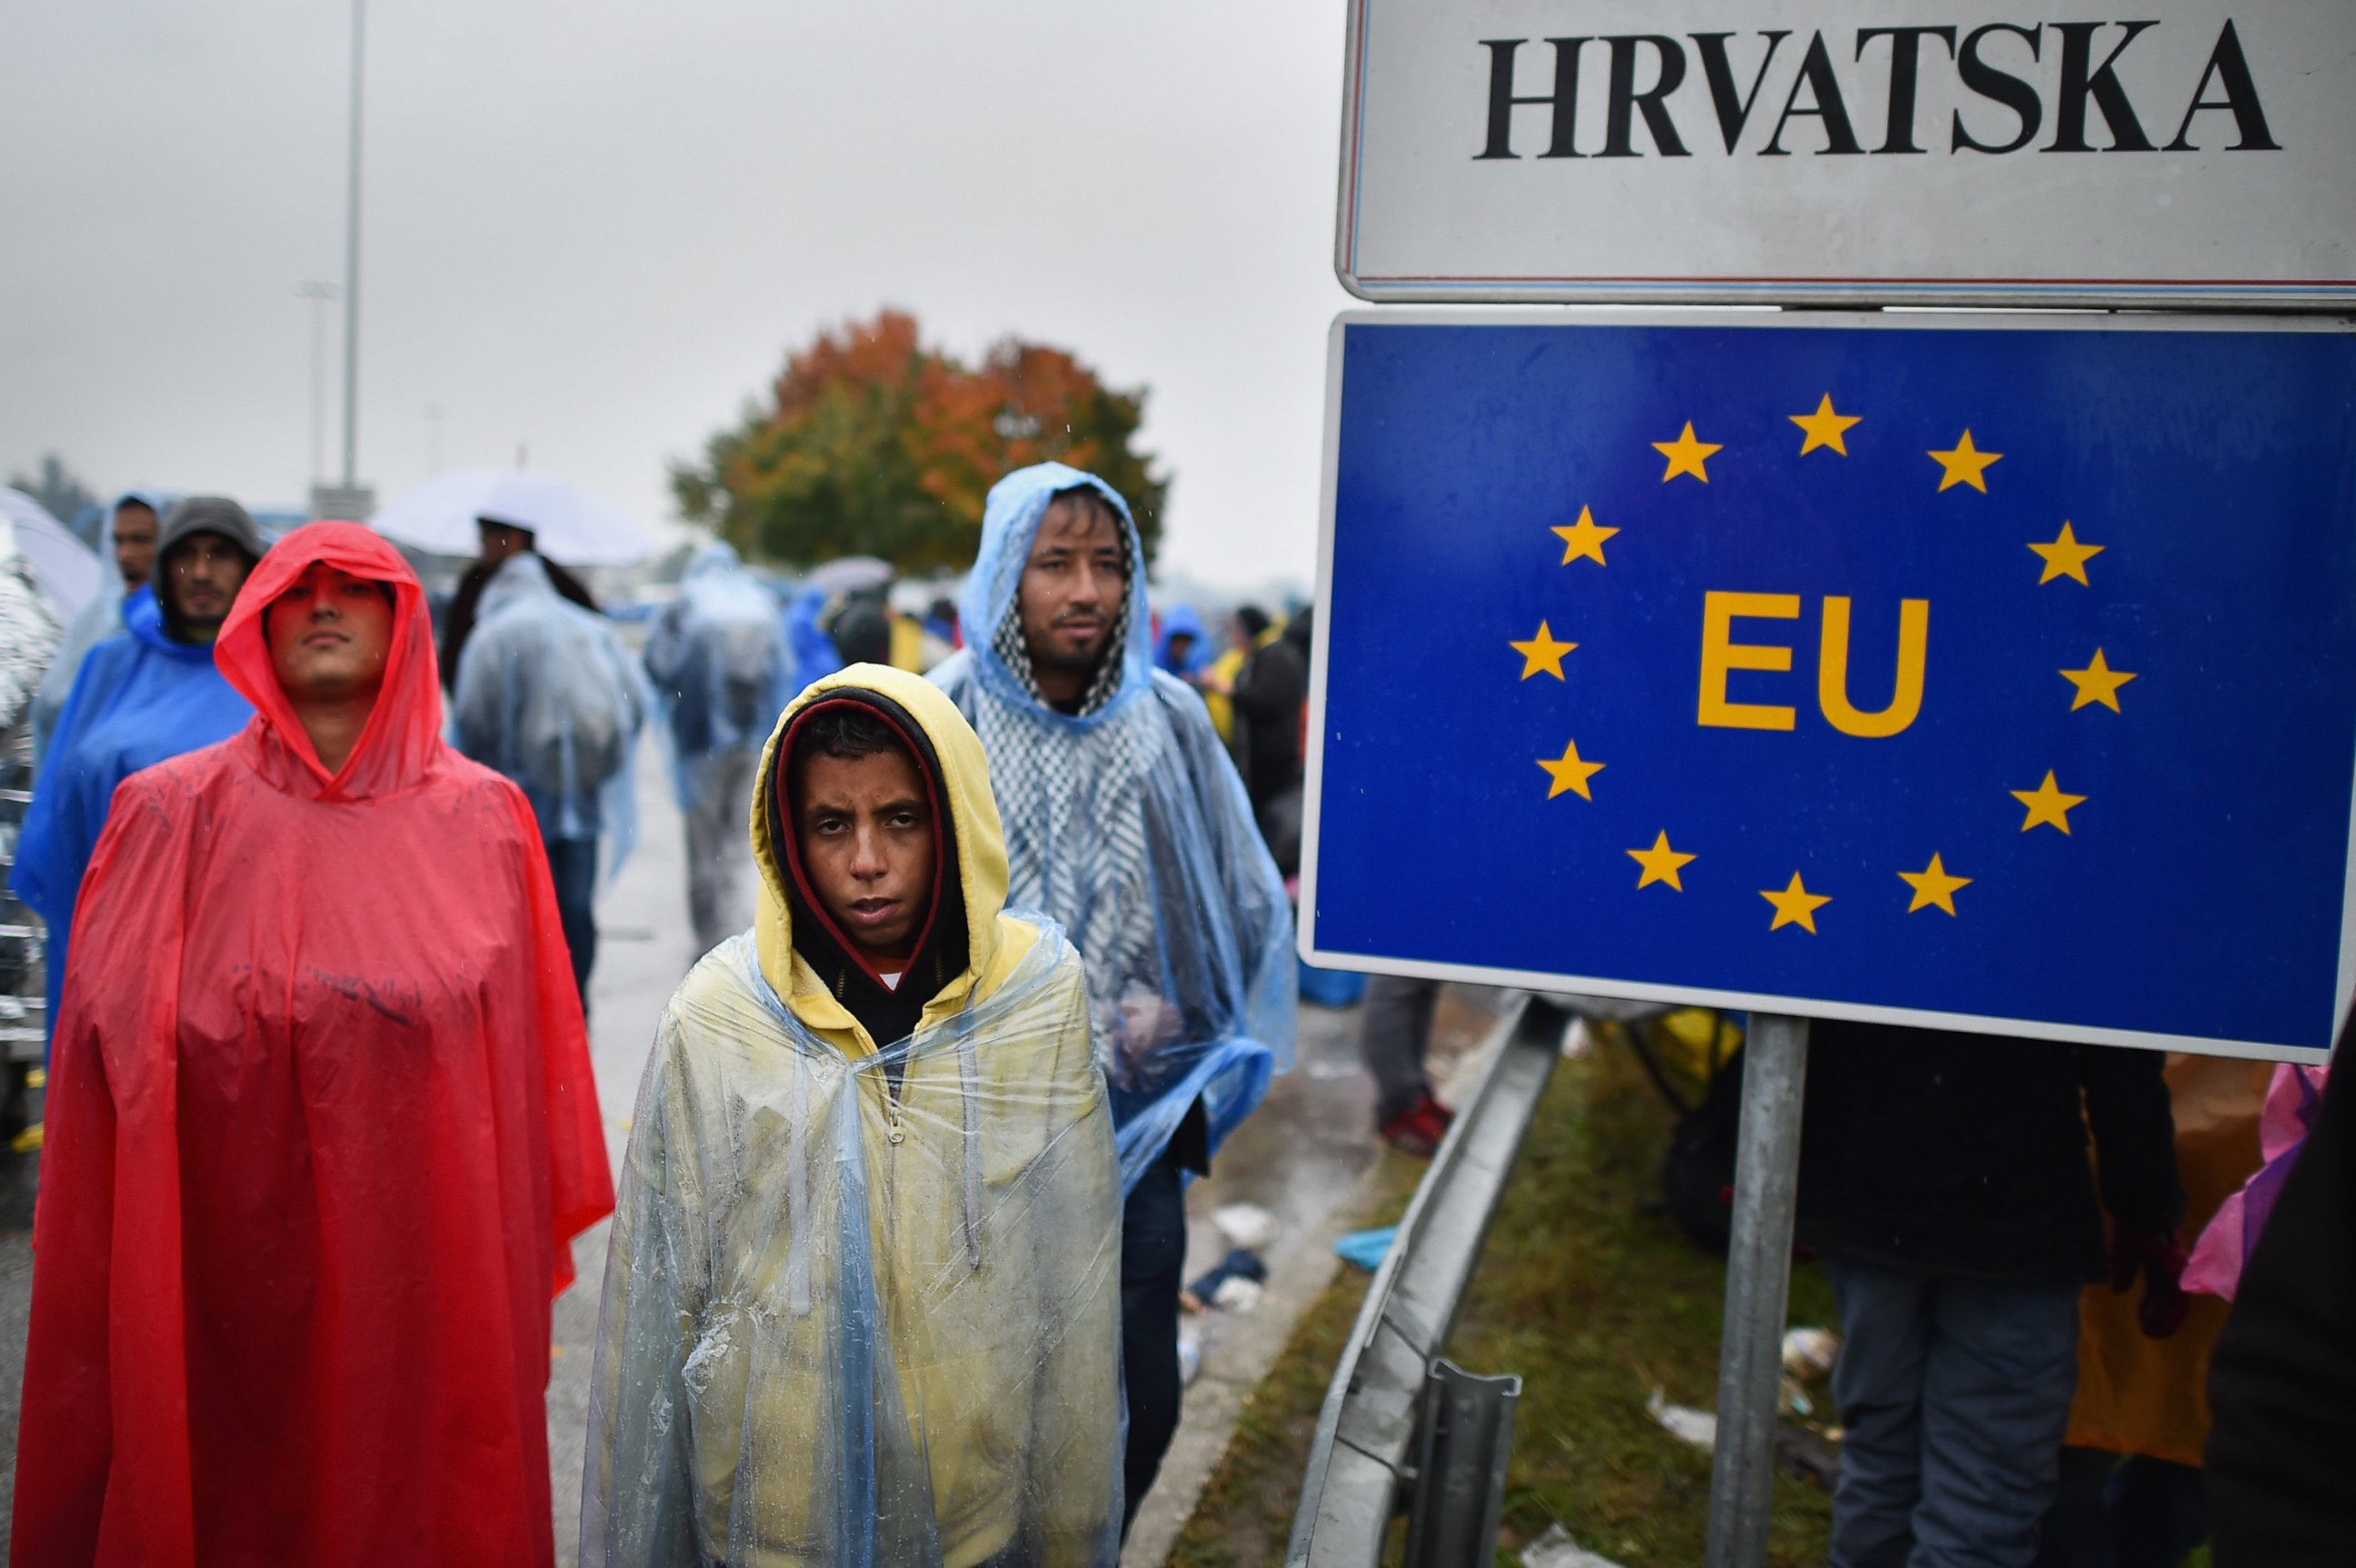 PHOTO: Migrants wait in the rain at the Trnovec border crossing with Slovenia as restrictions on movements have produced bottlenecks on Croatia's borders, on Oct. 19, 2015 in Trnovec, Croatia.